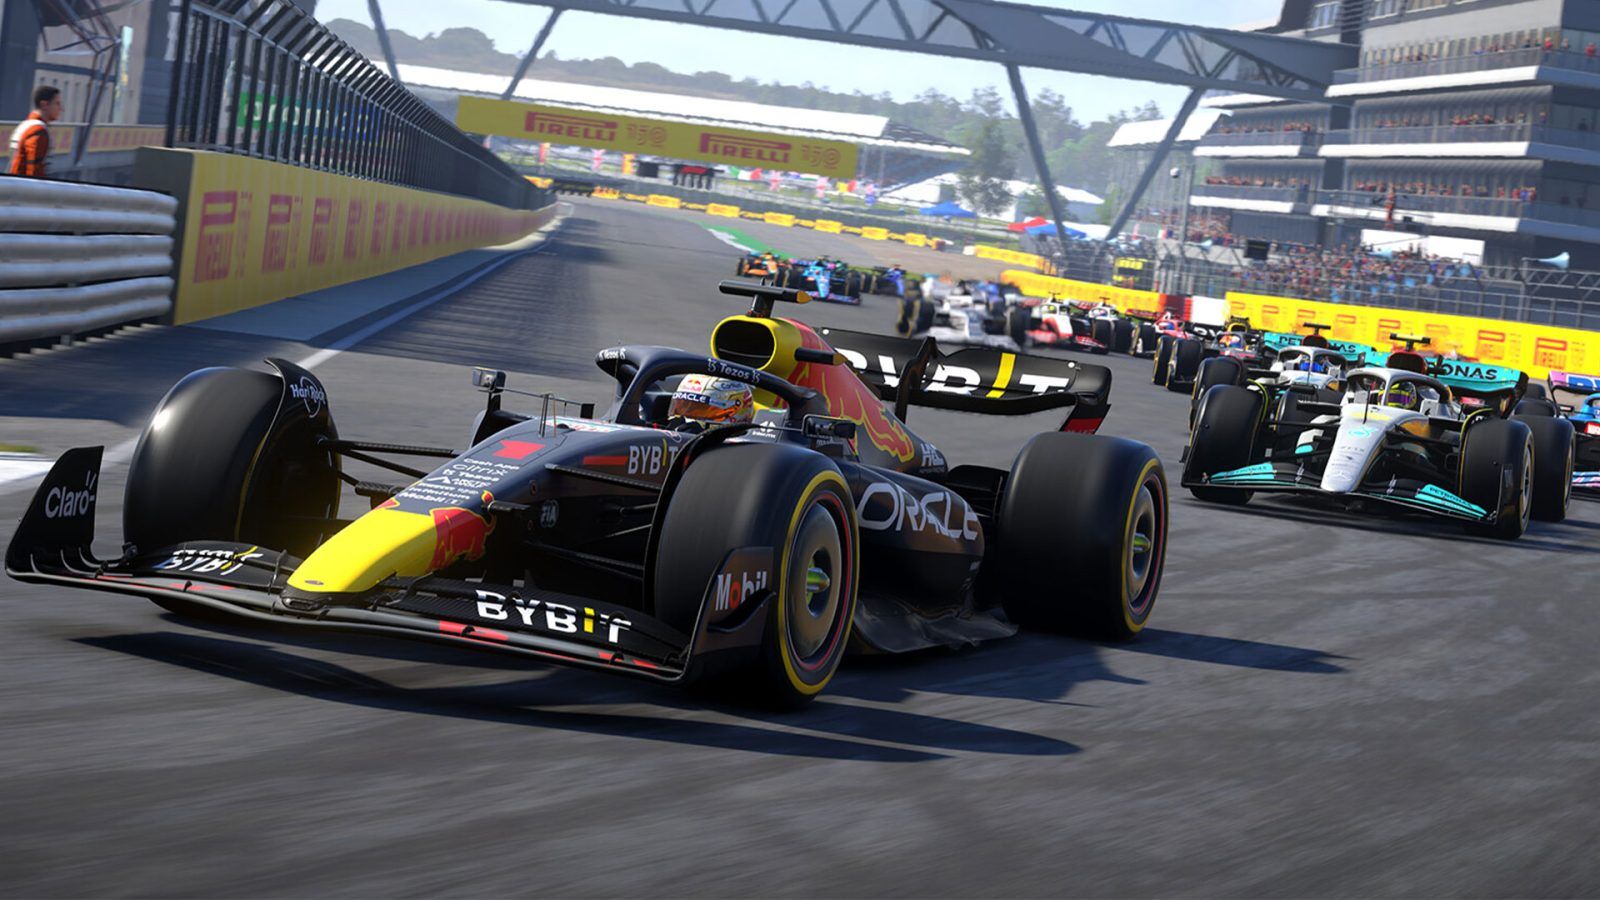 F1 22 screenshot of Verstappen being chased by field of cars at Silverstone